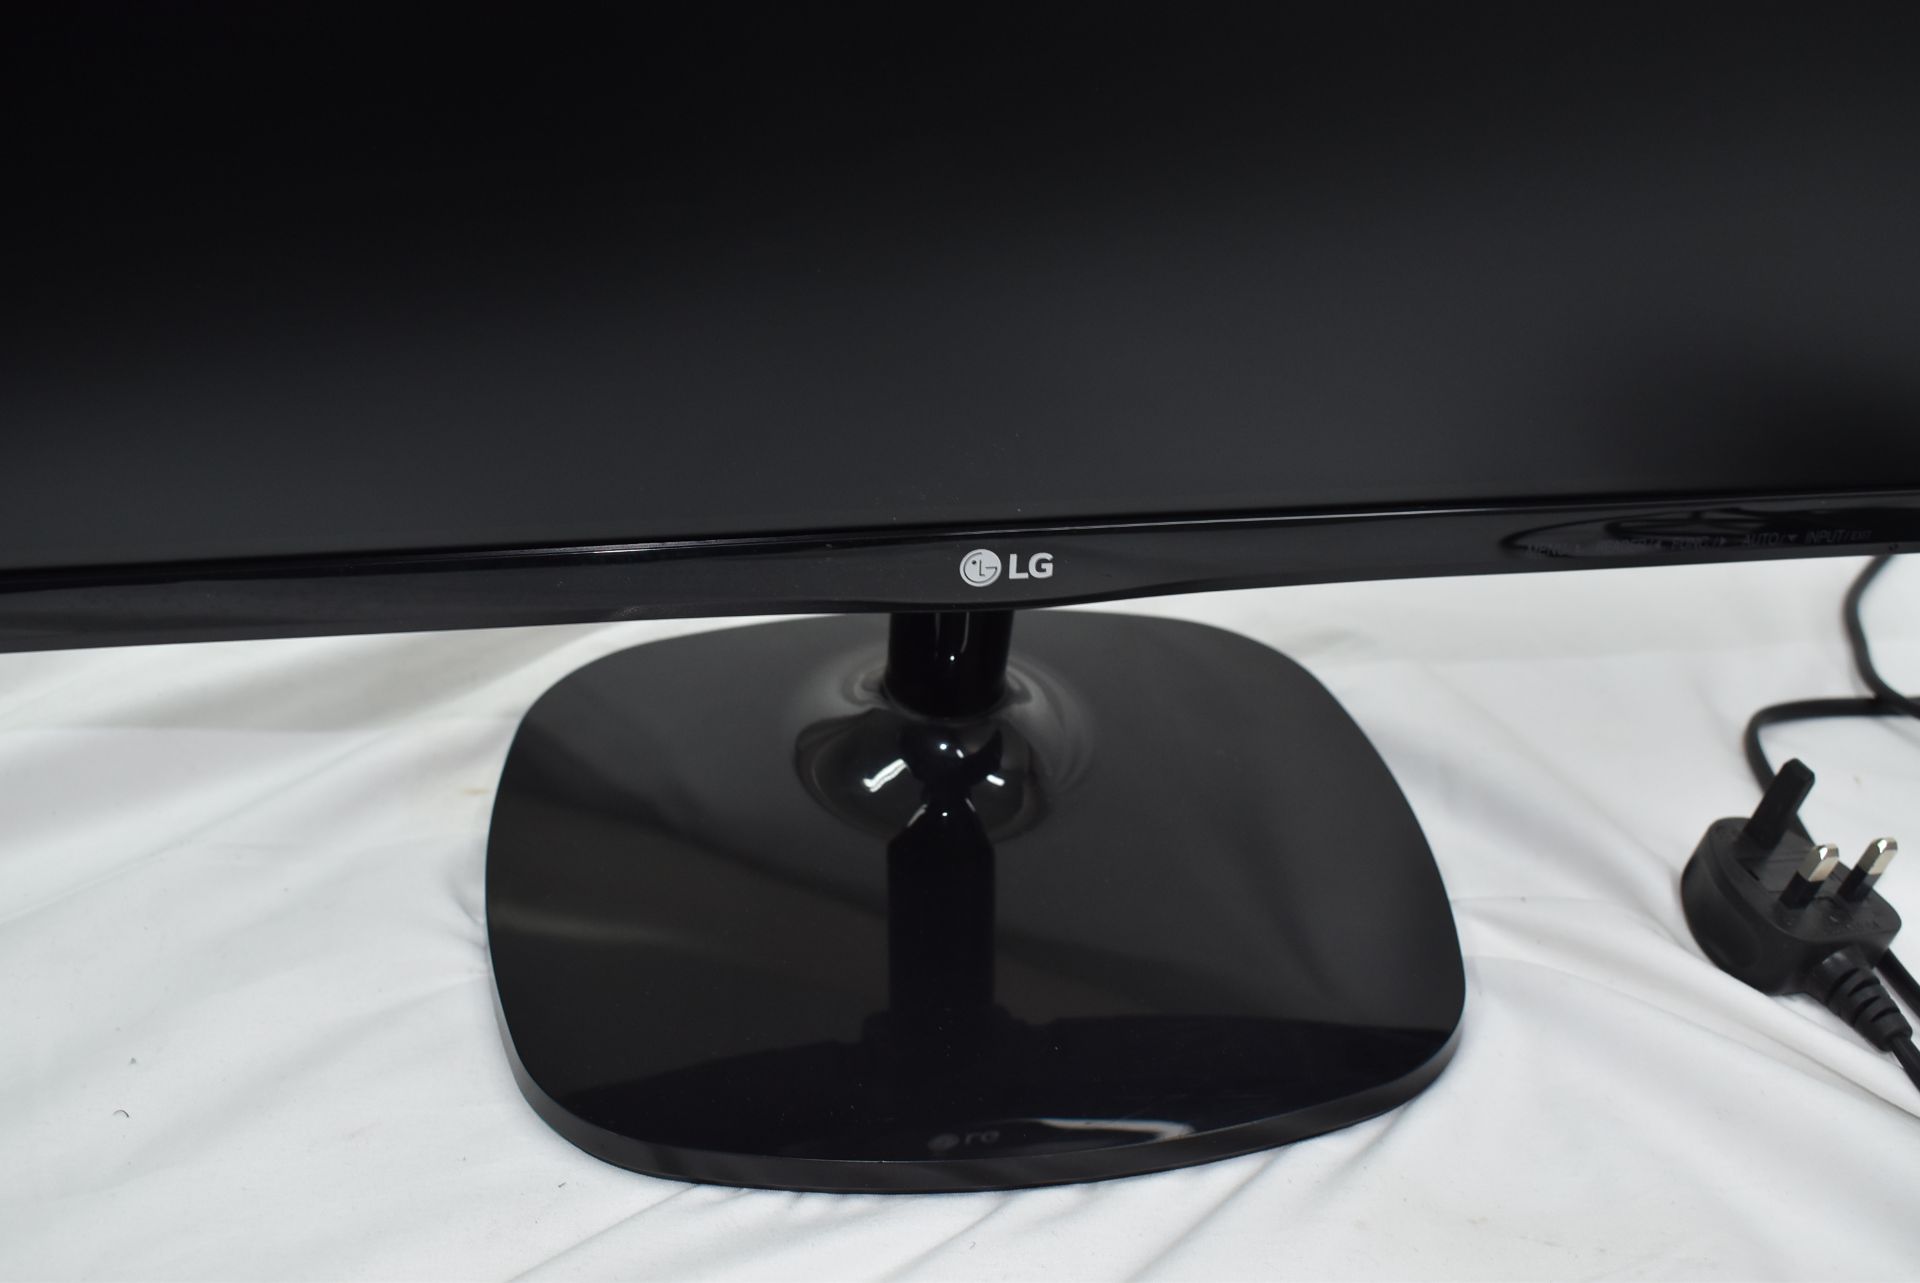 1 x LG 27 Inch LED Monitor - Model 27MP48HQ-P - Includes Power Supply and HDMI Lead - CL882 - - Image 2 of 4